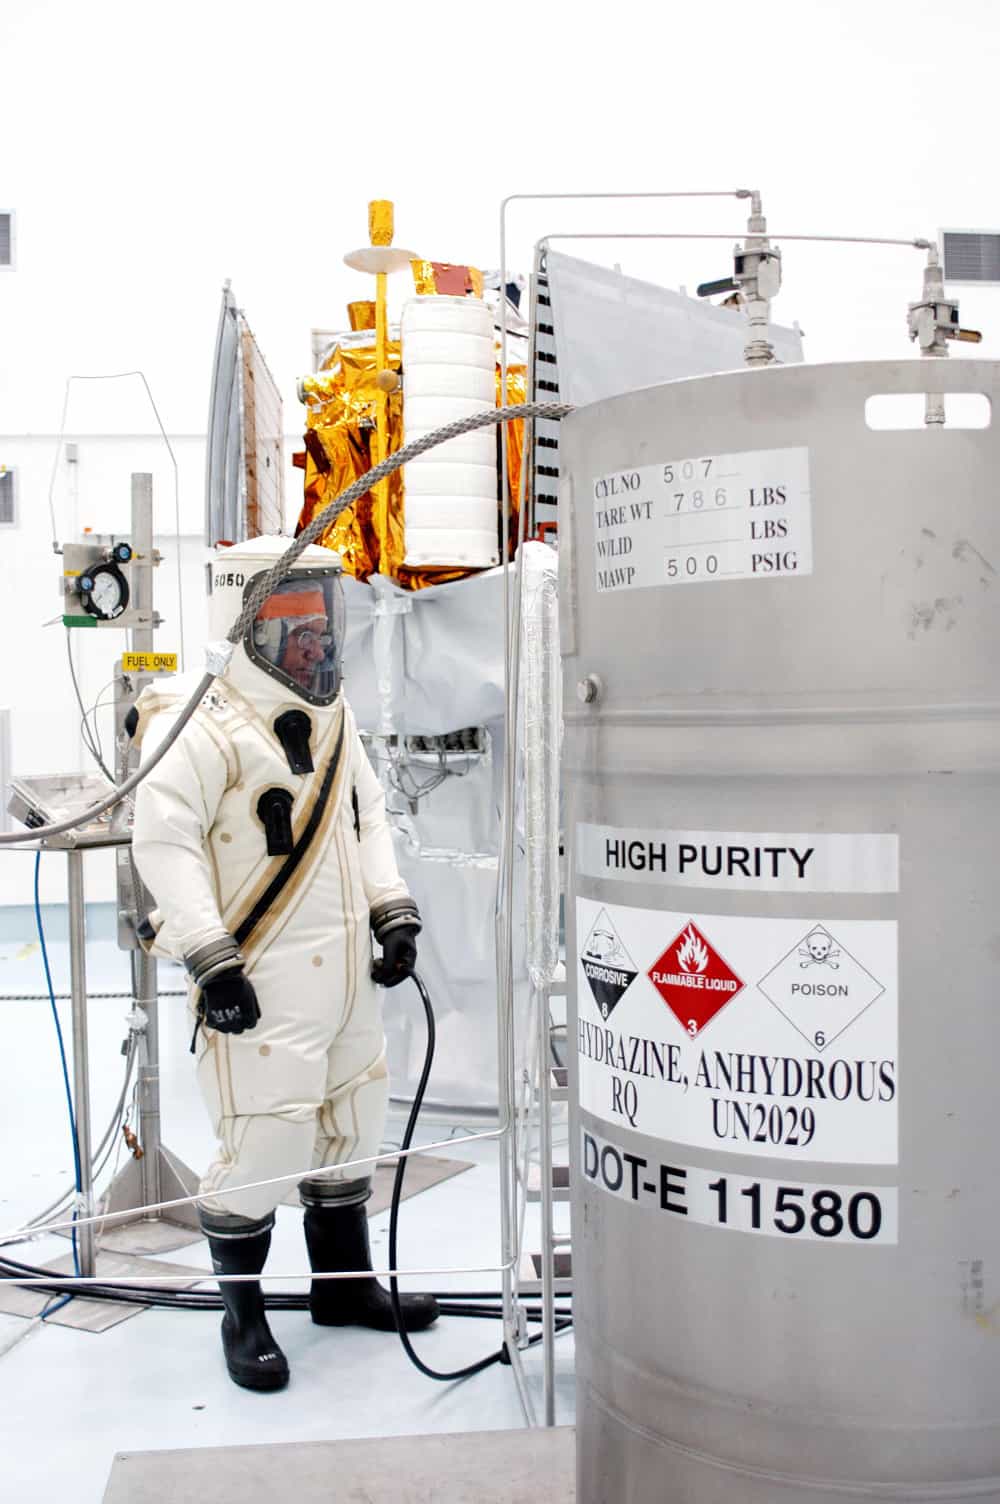 The hypergolic fuel hydrazine being loaded onto the MESSENGER space probe. Note the safety suit the technician is wearing.